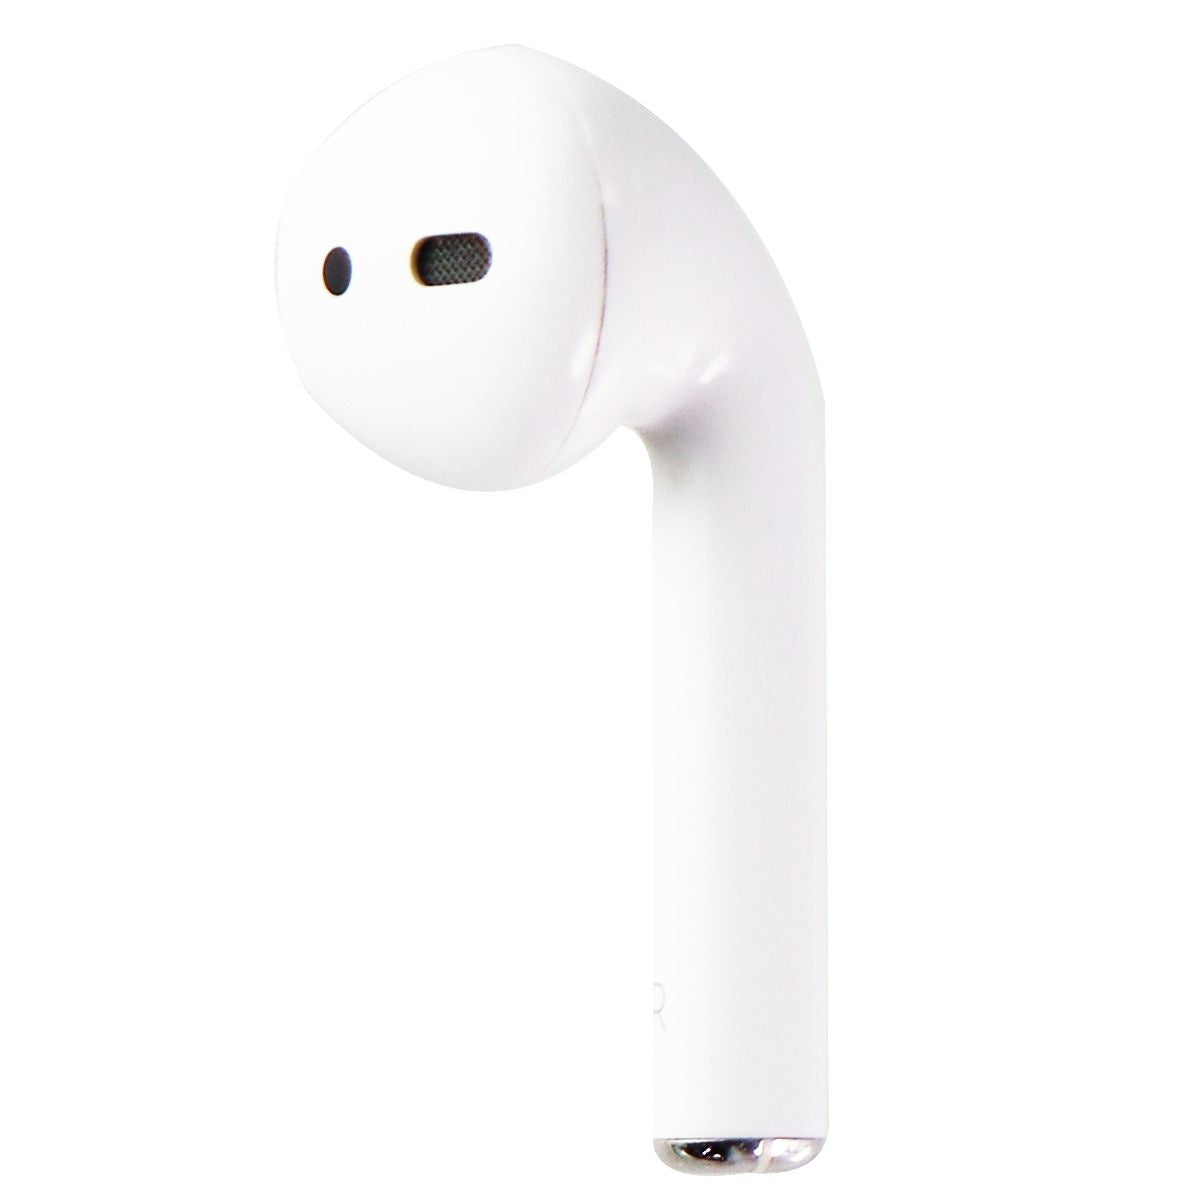 Apple Airpod Right Side Only (A1523) 1st Generation - White Portable Audio - Headphones Apple    - Simple Cell Bulk Wholesale Pricing - USA Seller